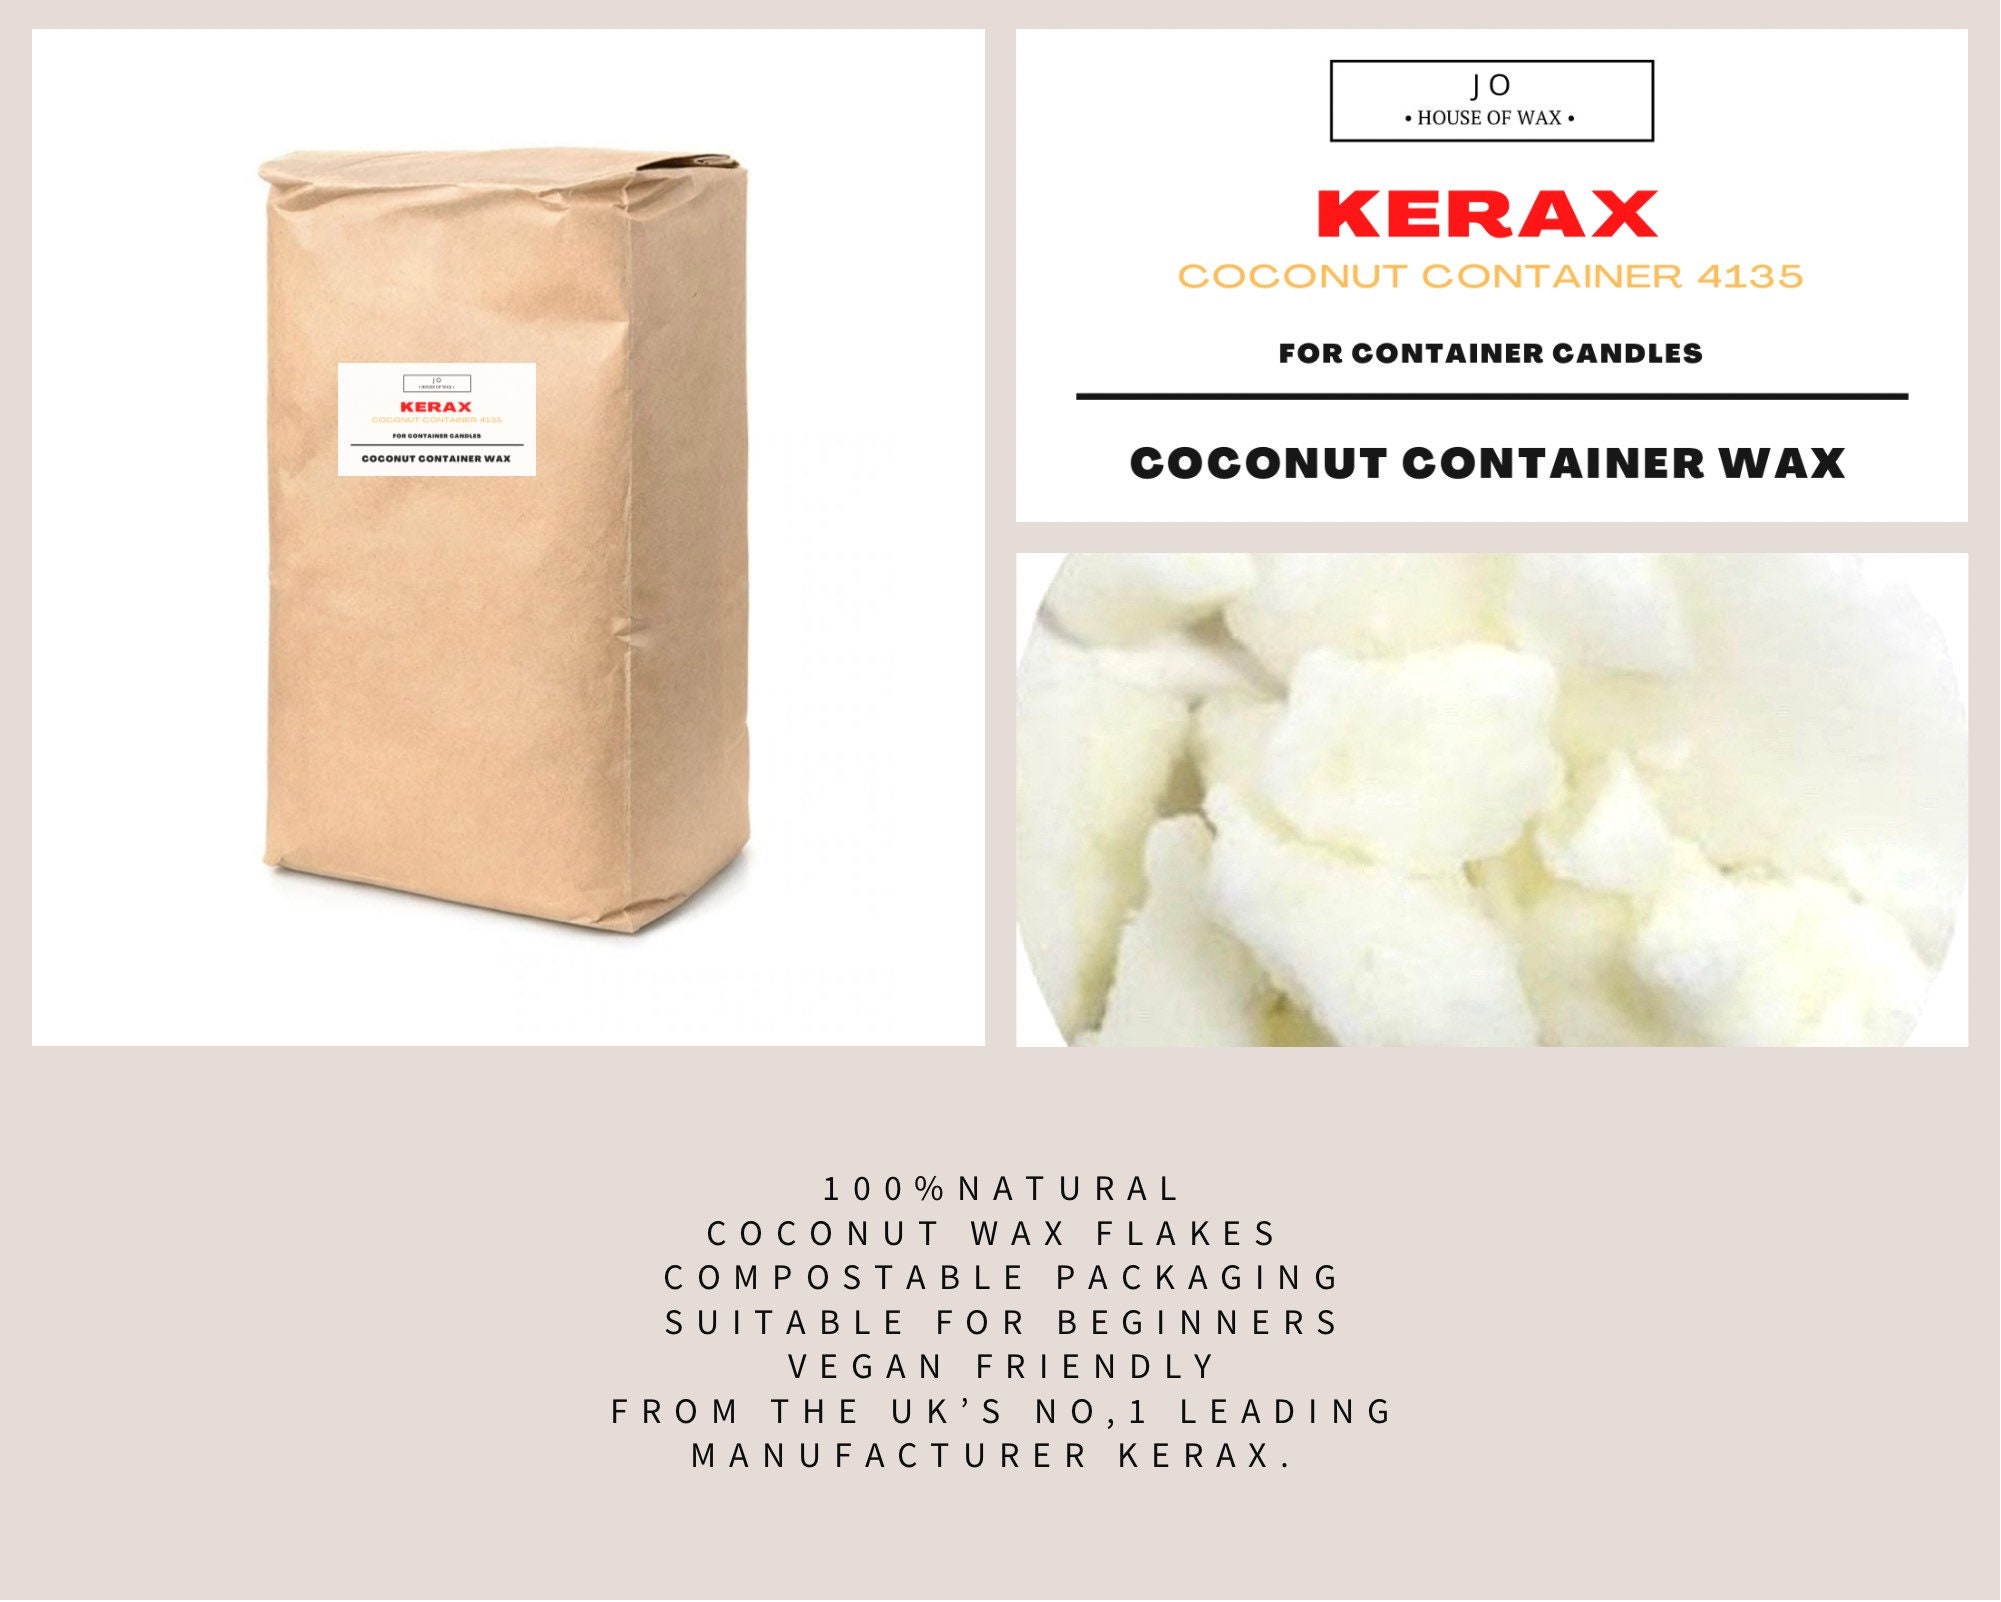 100% Organic pure coconut wax,- nothing added, hydrogenated